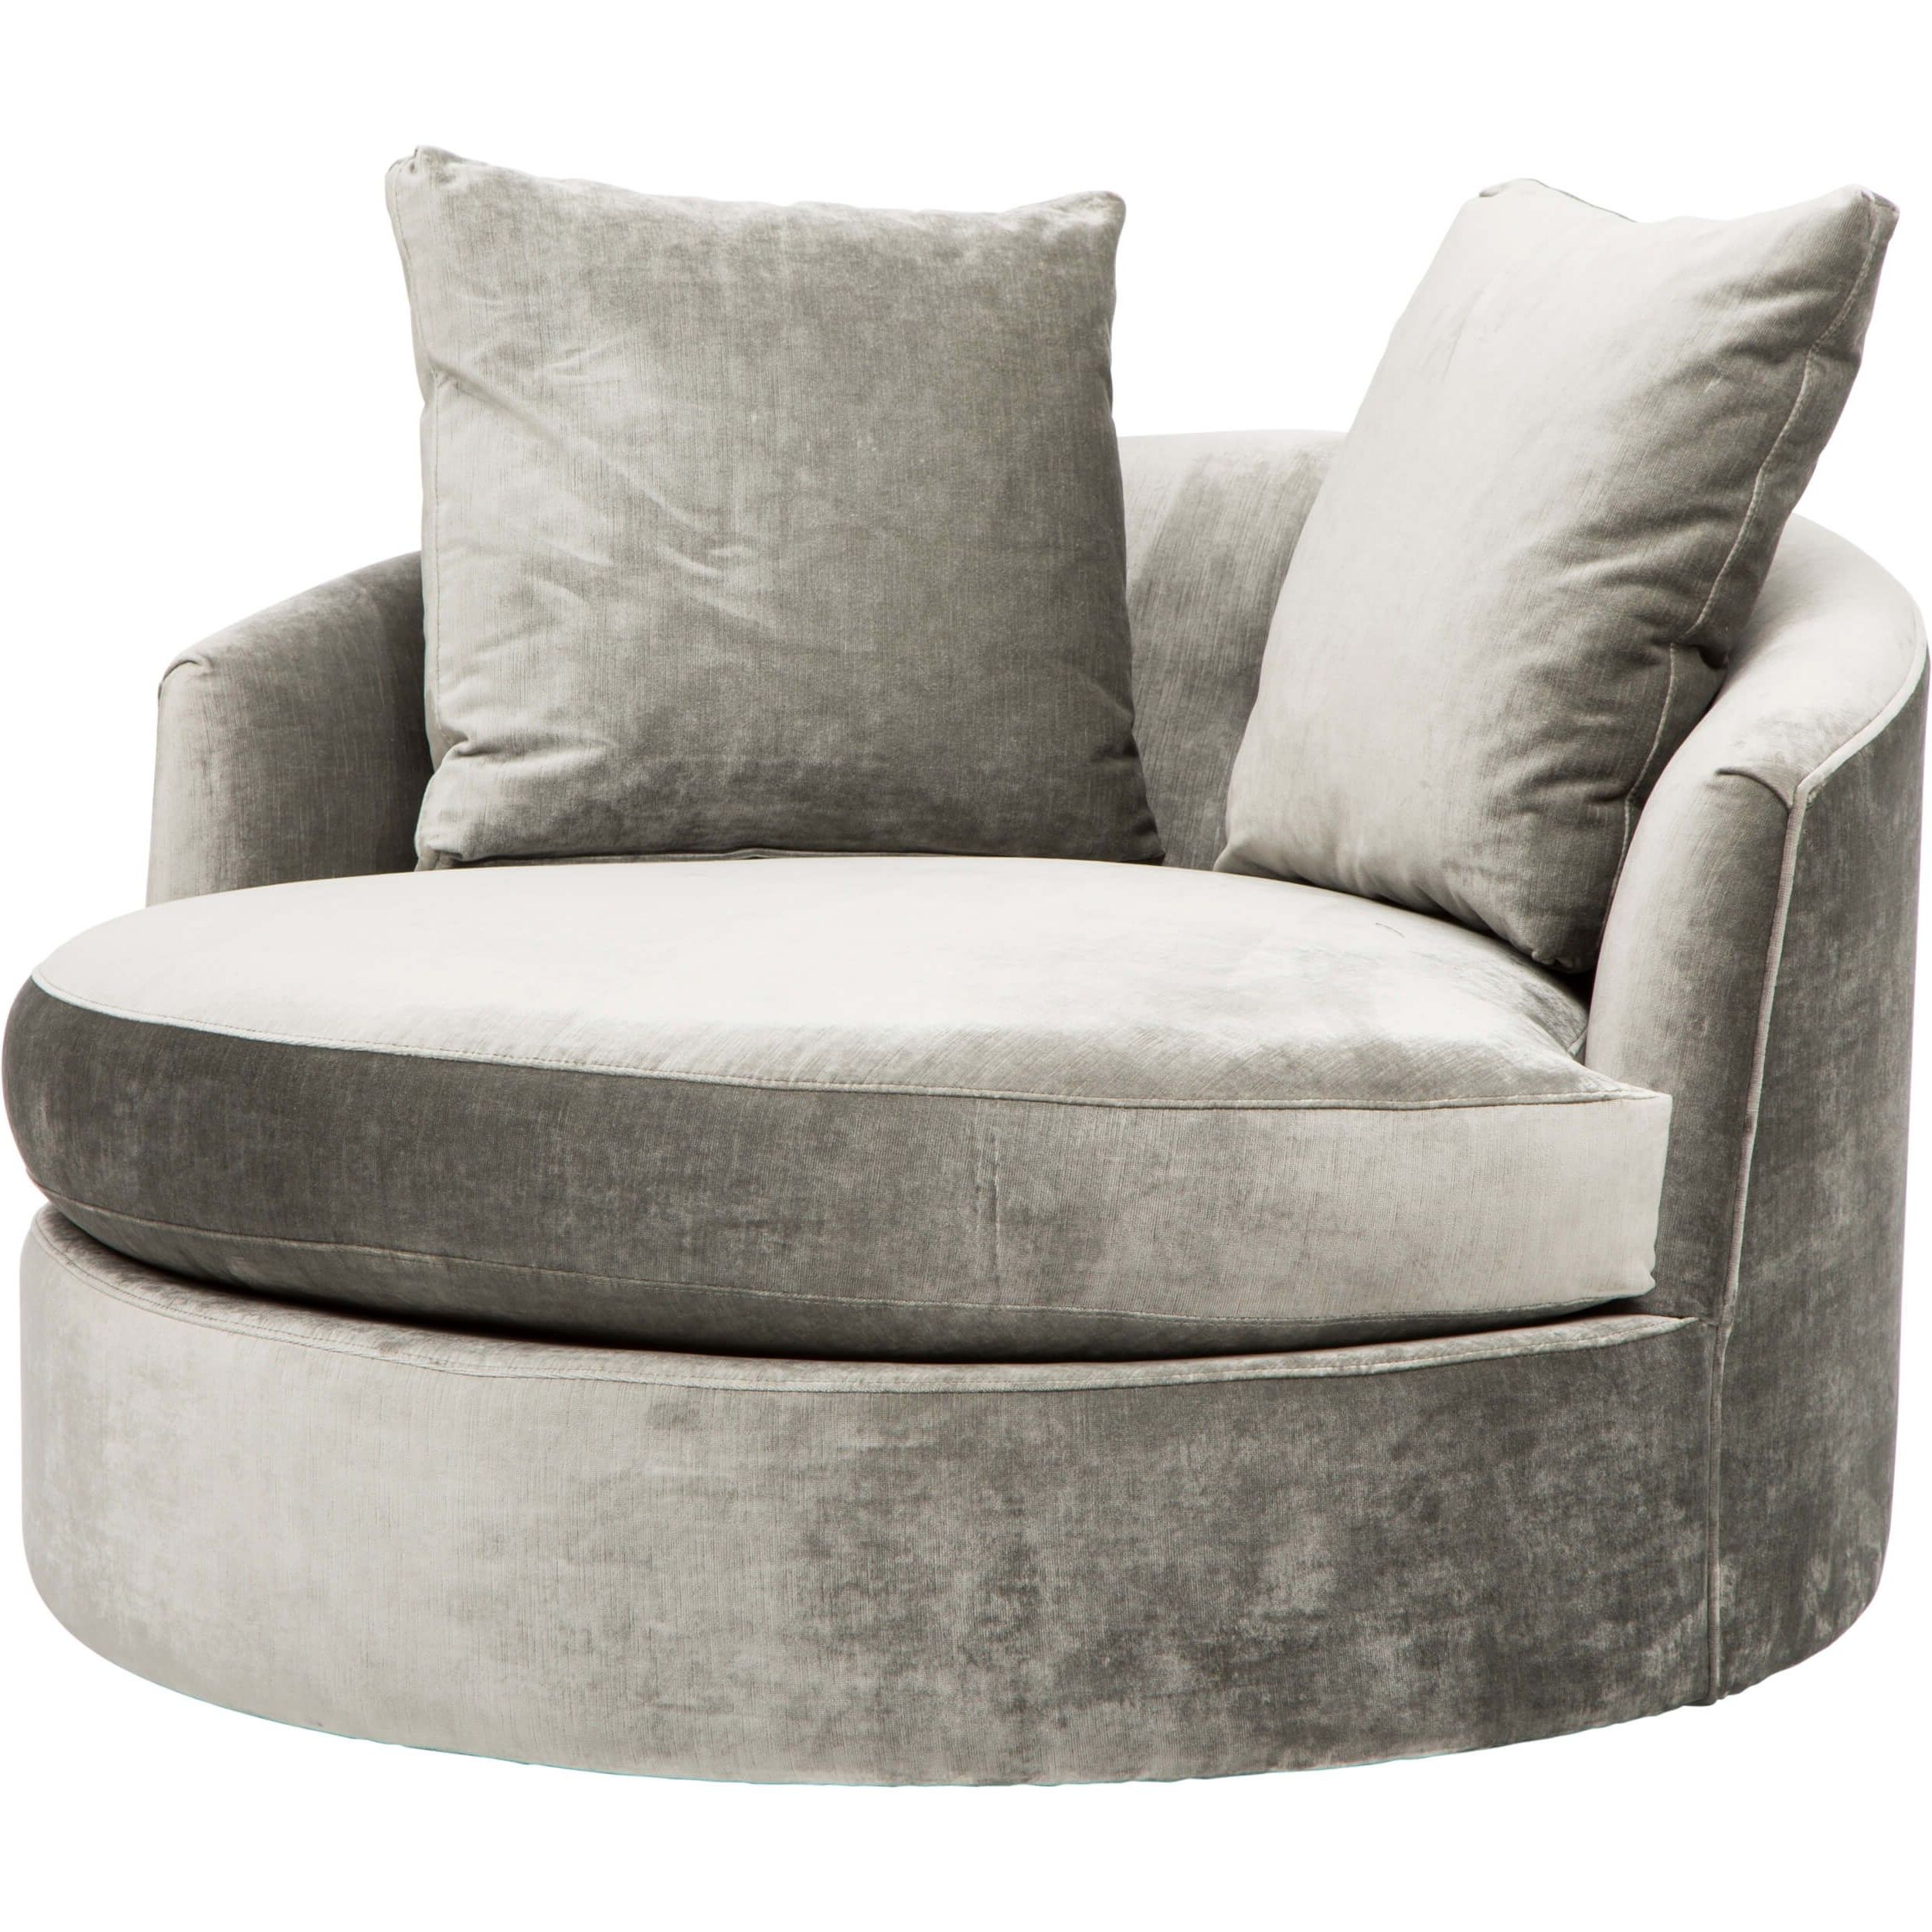 Products We Love In 2018 For Best And Newest Charcoal Swivel Chairs (View 9 of 20)